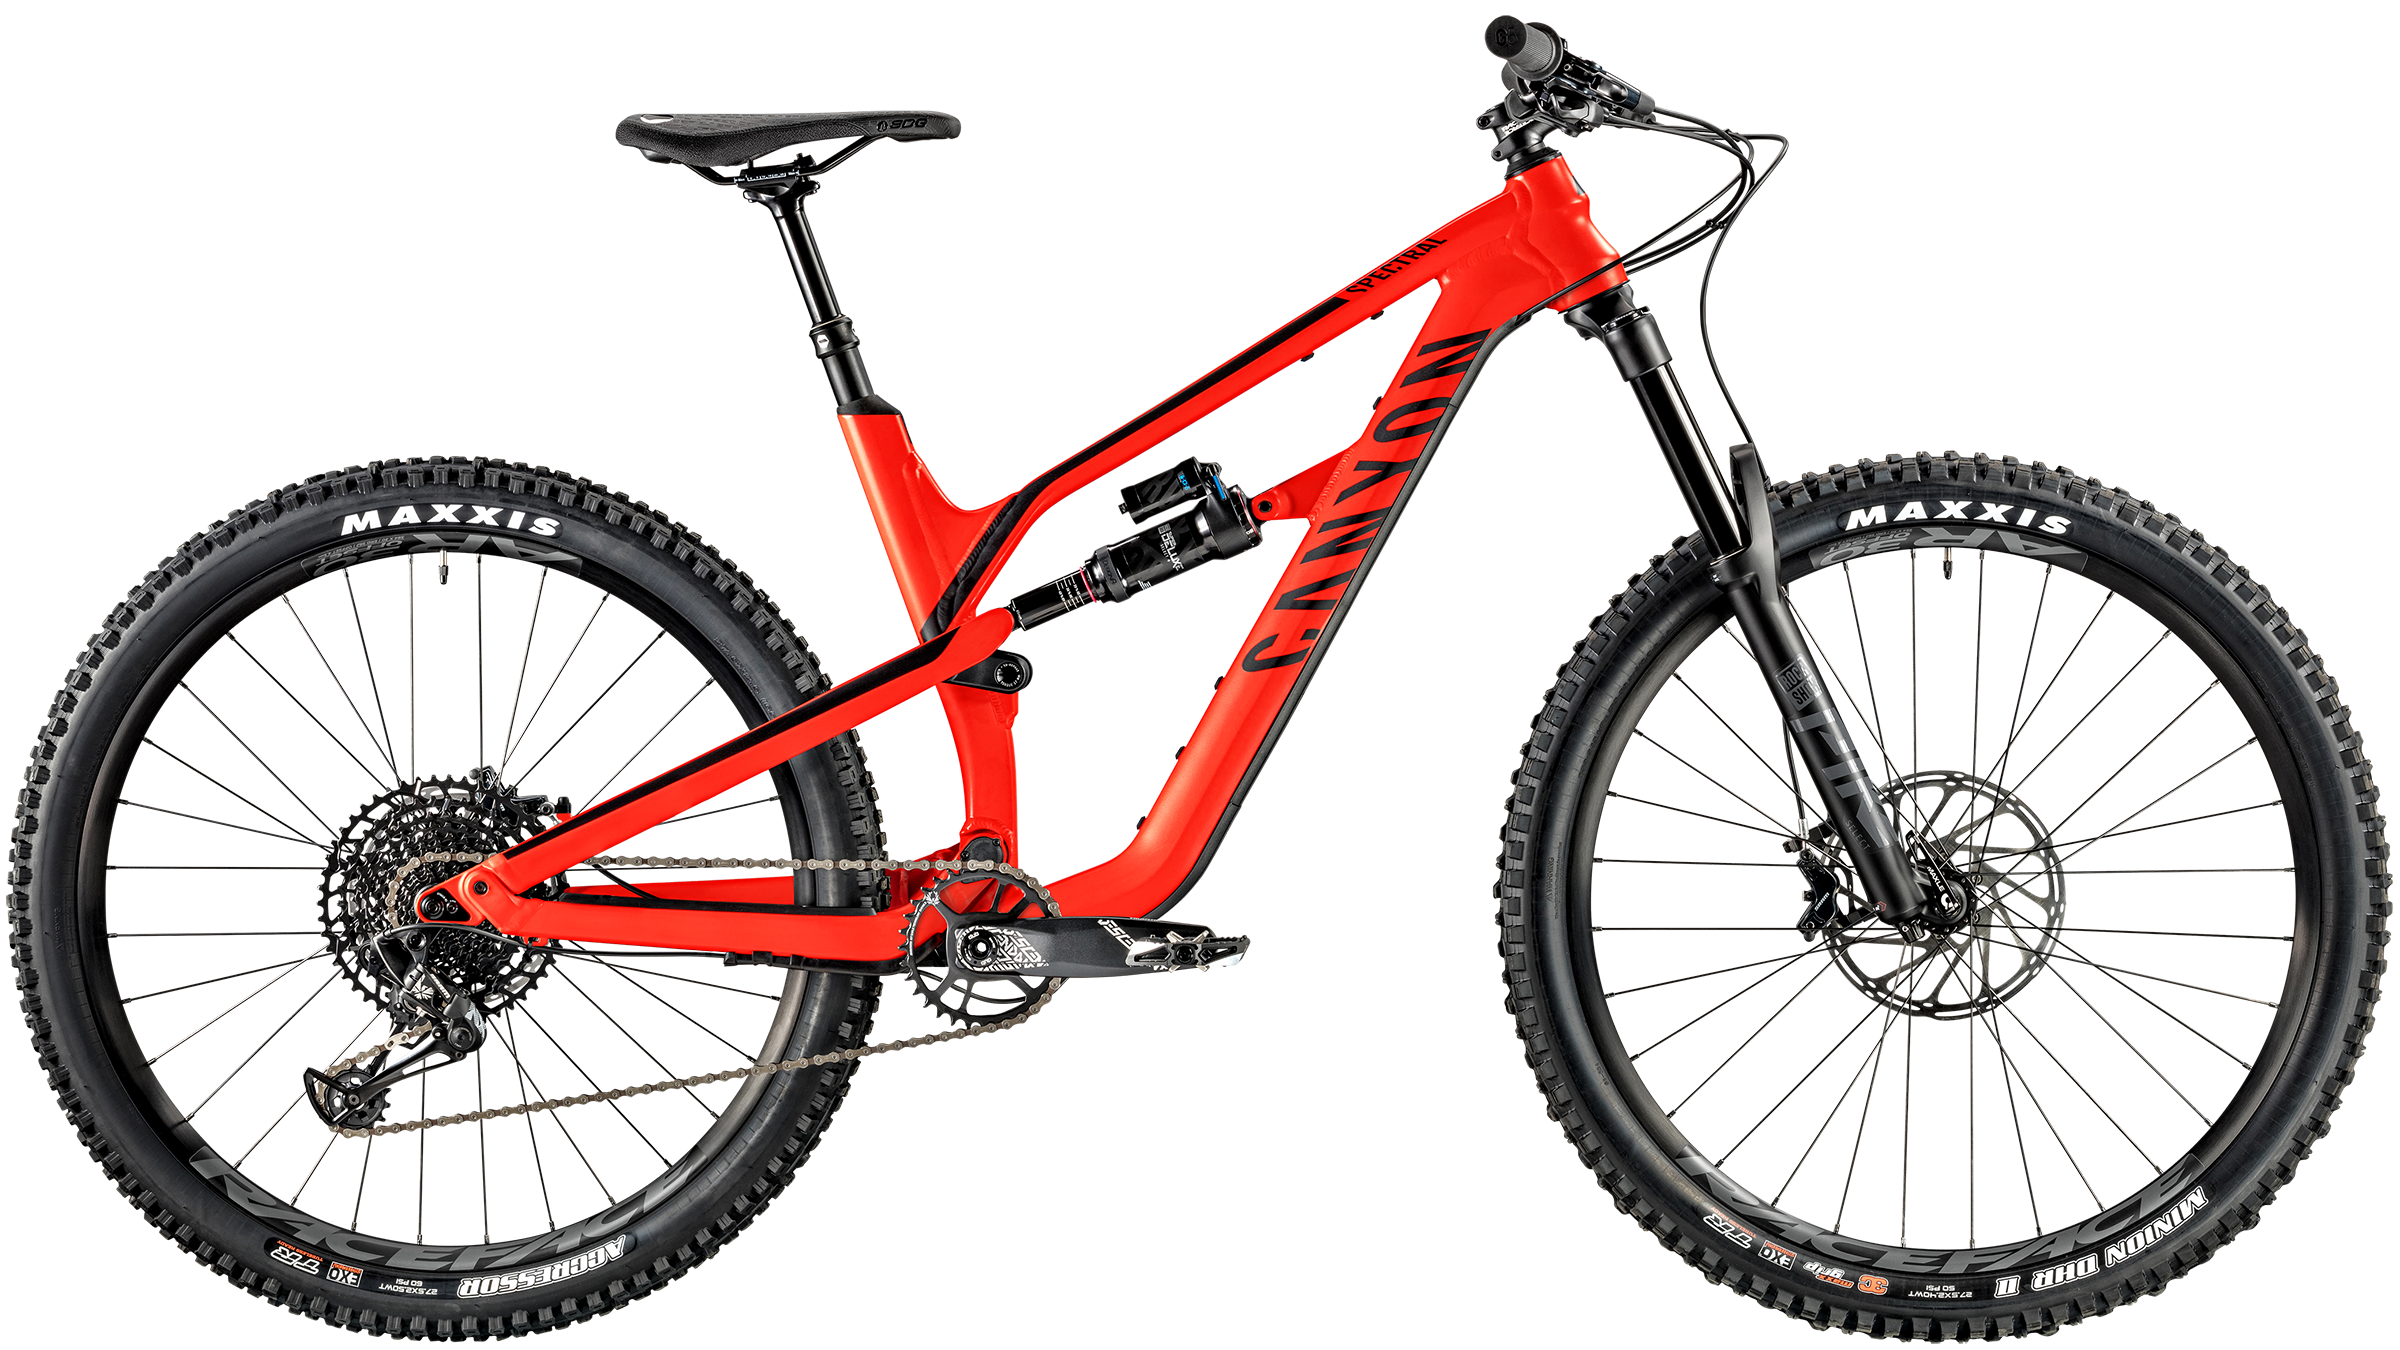 canyon spectral 2015